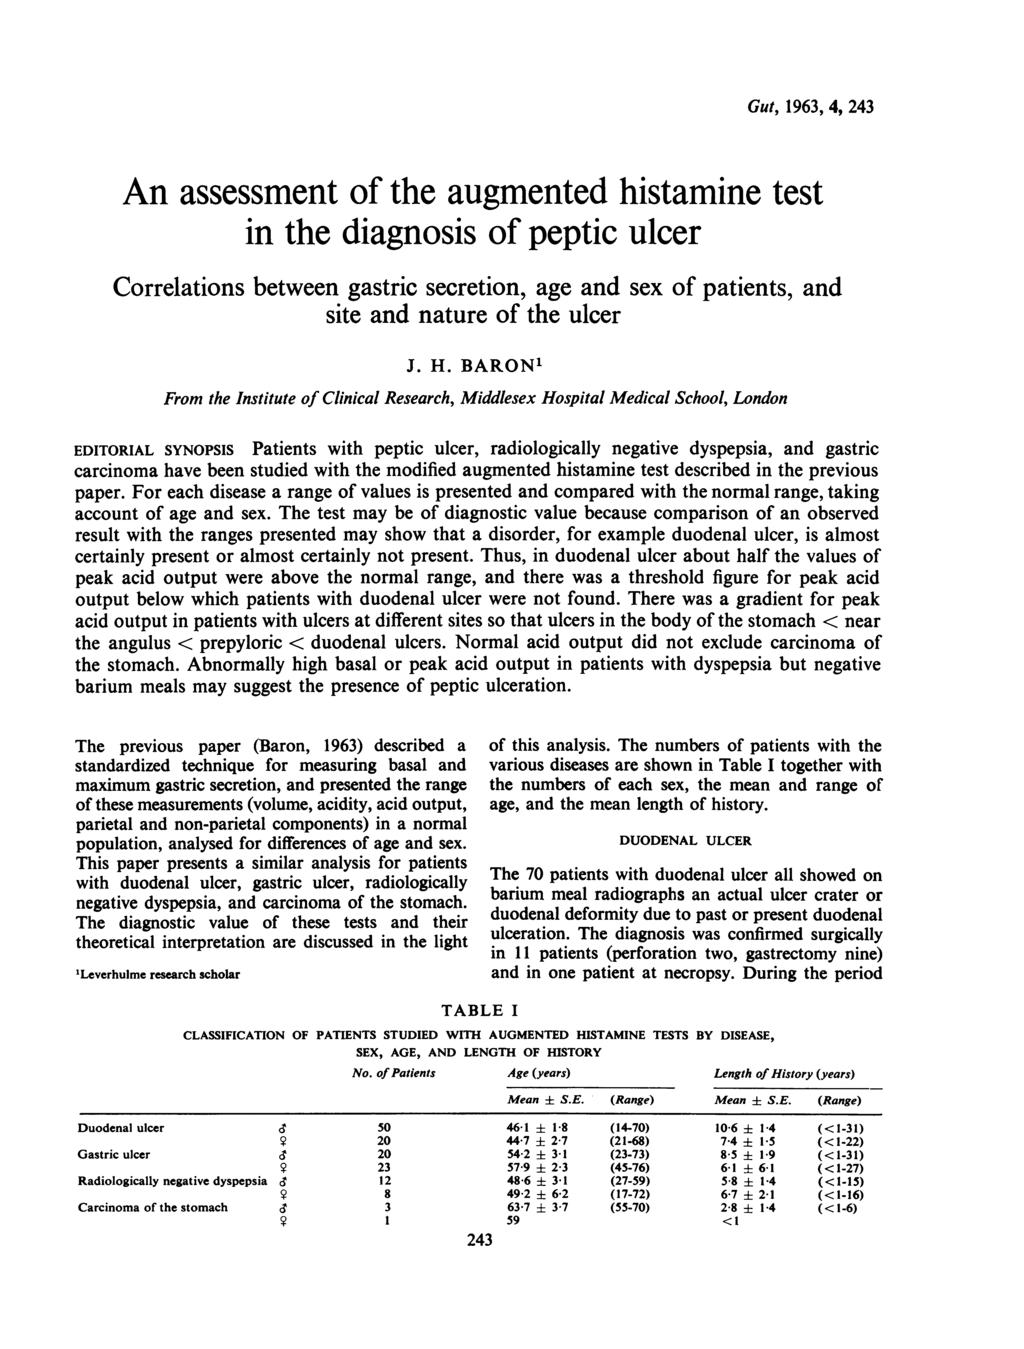 Gut, 1963, 4, 243 An assessment of the augmented histamine test in the diagnosis of peptic ulcer Correlations between gastric secretion, age and se of patients, and site and nature of the ulcer J. H.